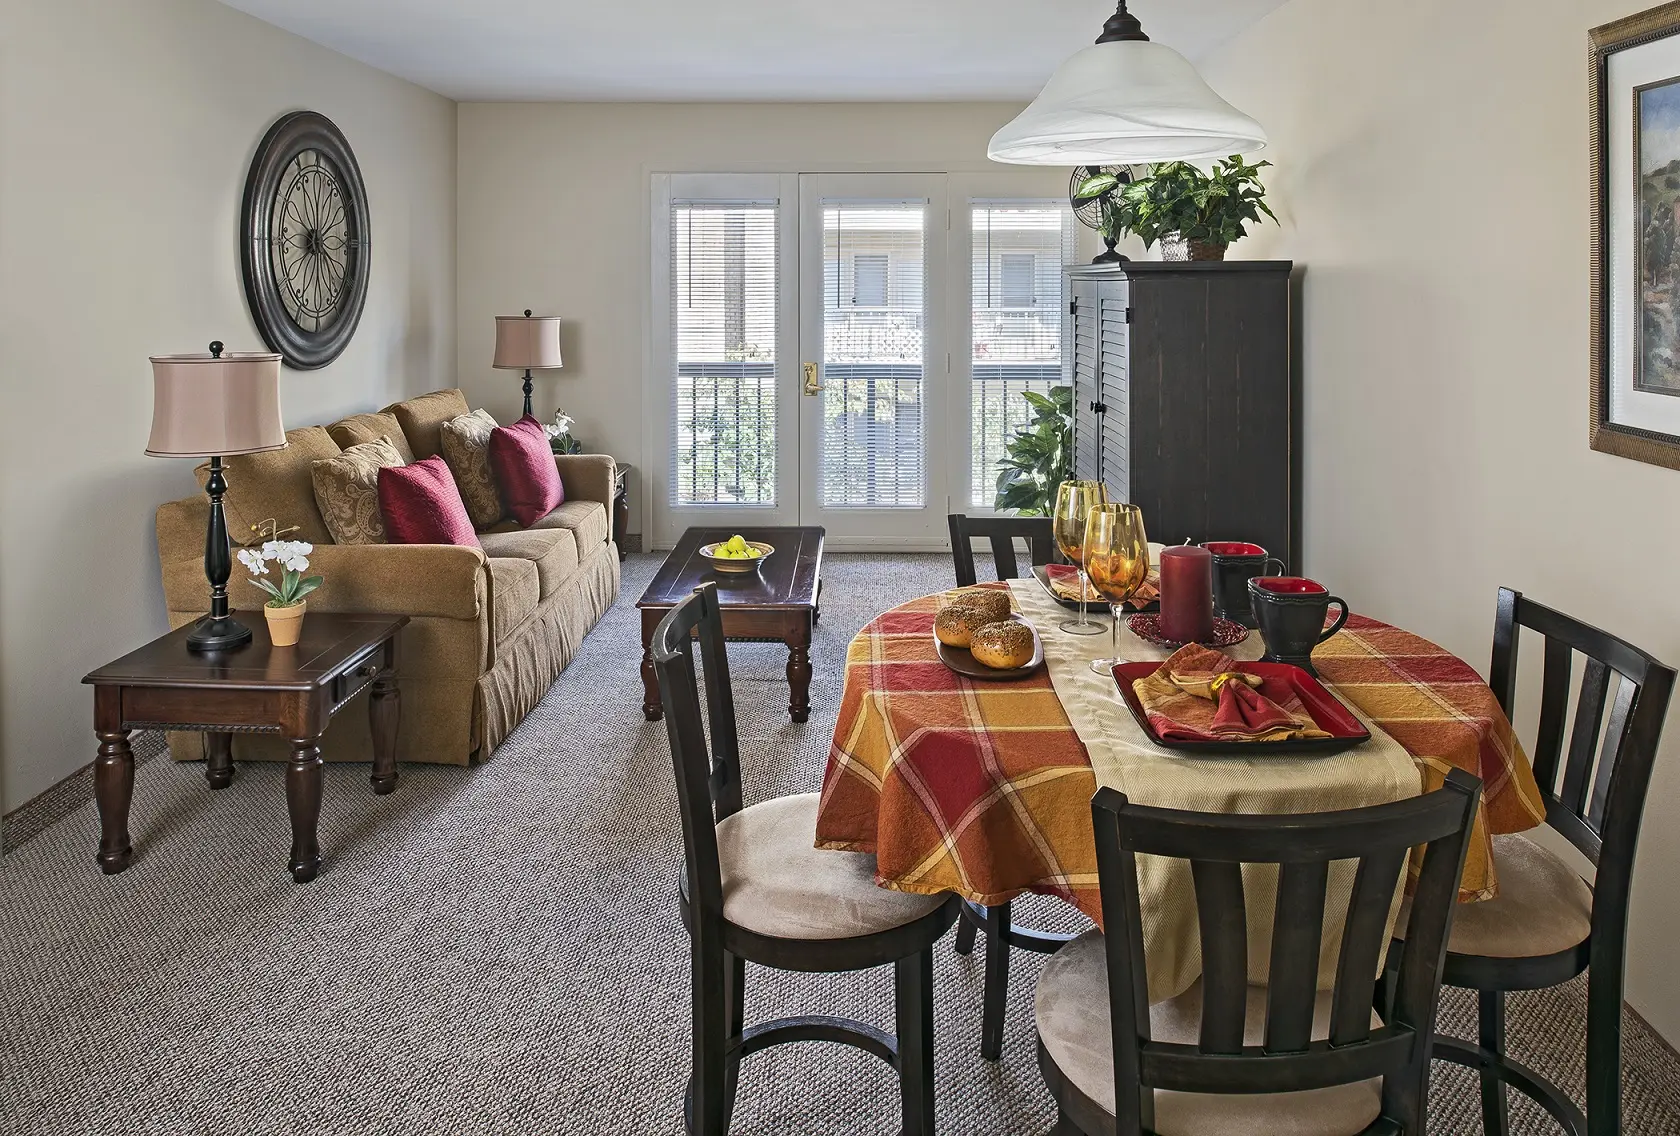 Family room and dining area of a senior apartment at American House Carpenter, a senior living community in Ypsilanti, Michigan